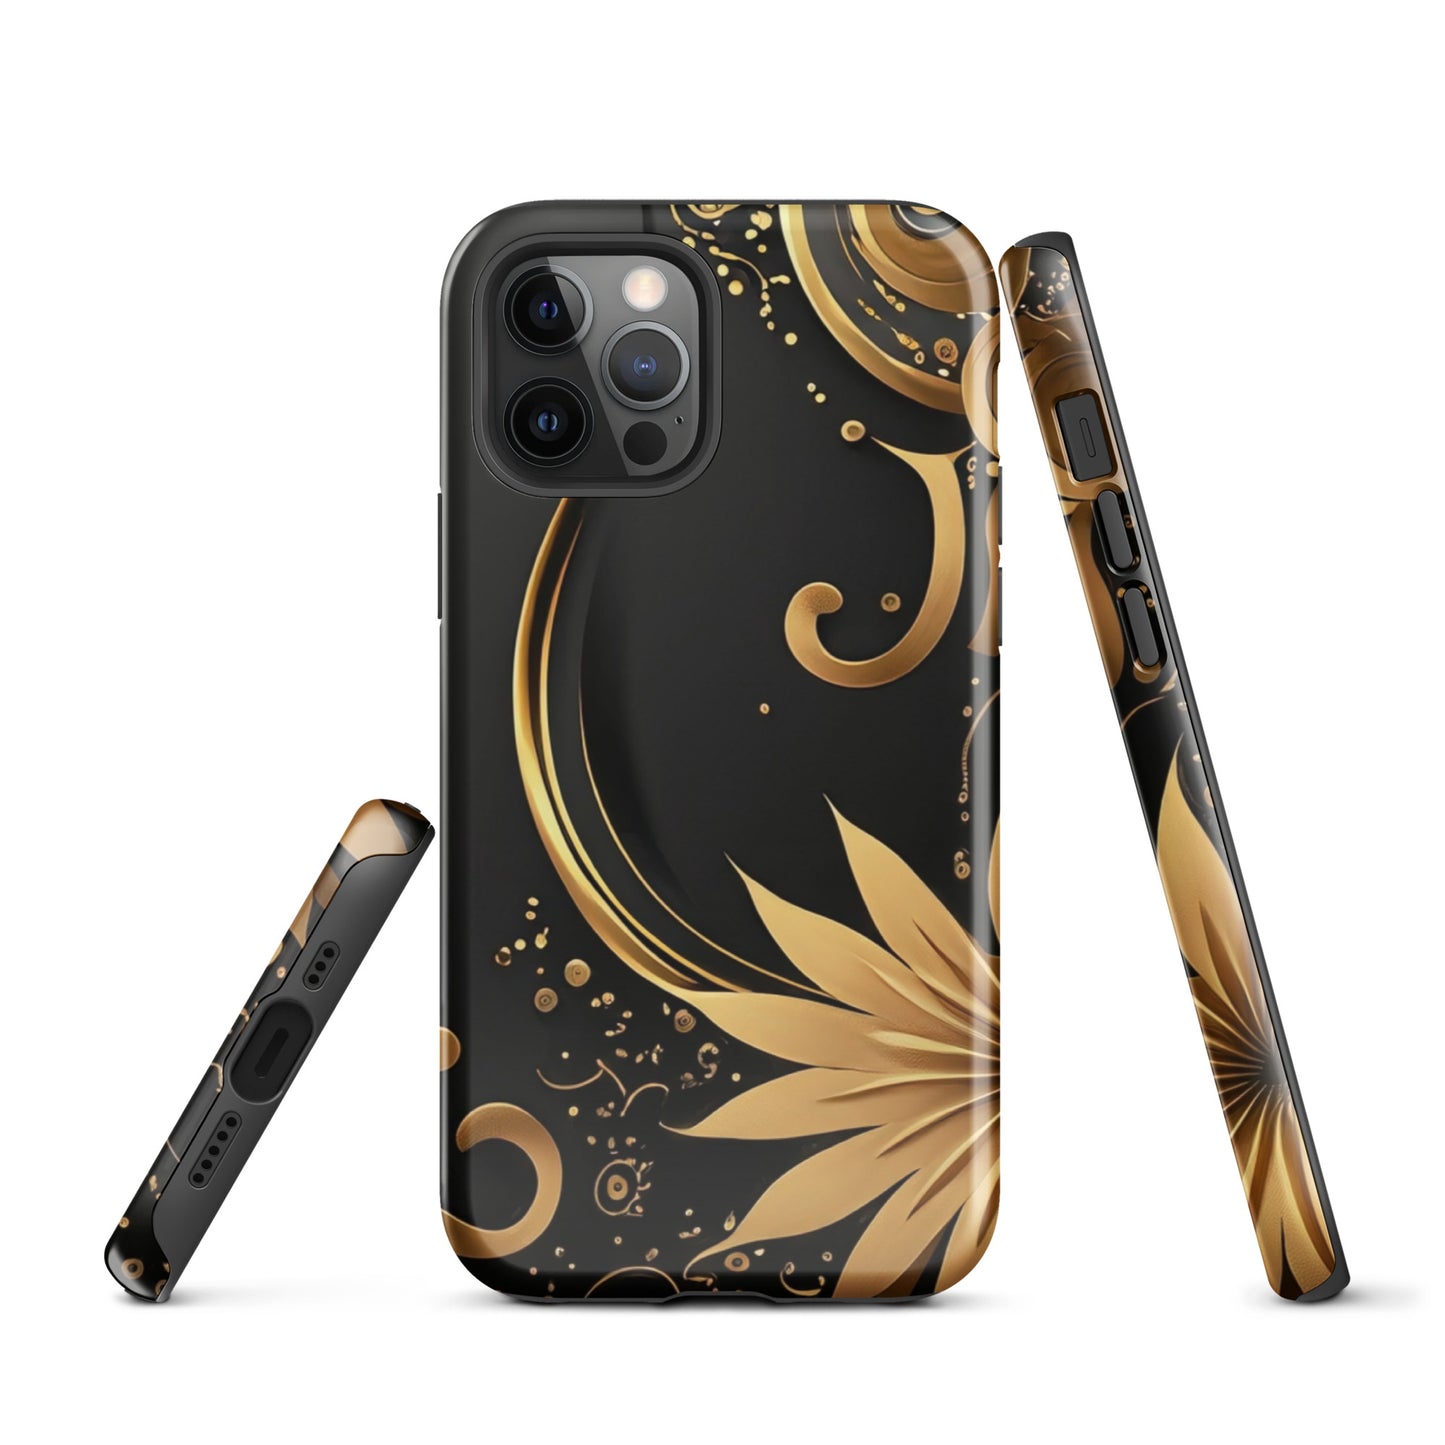 A Golden Flower Case for the iPhone 12 Pro 